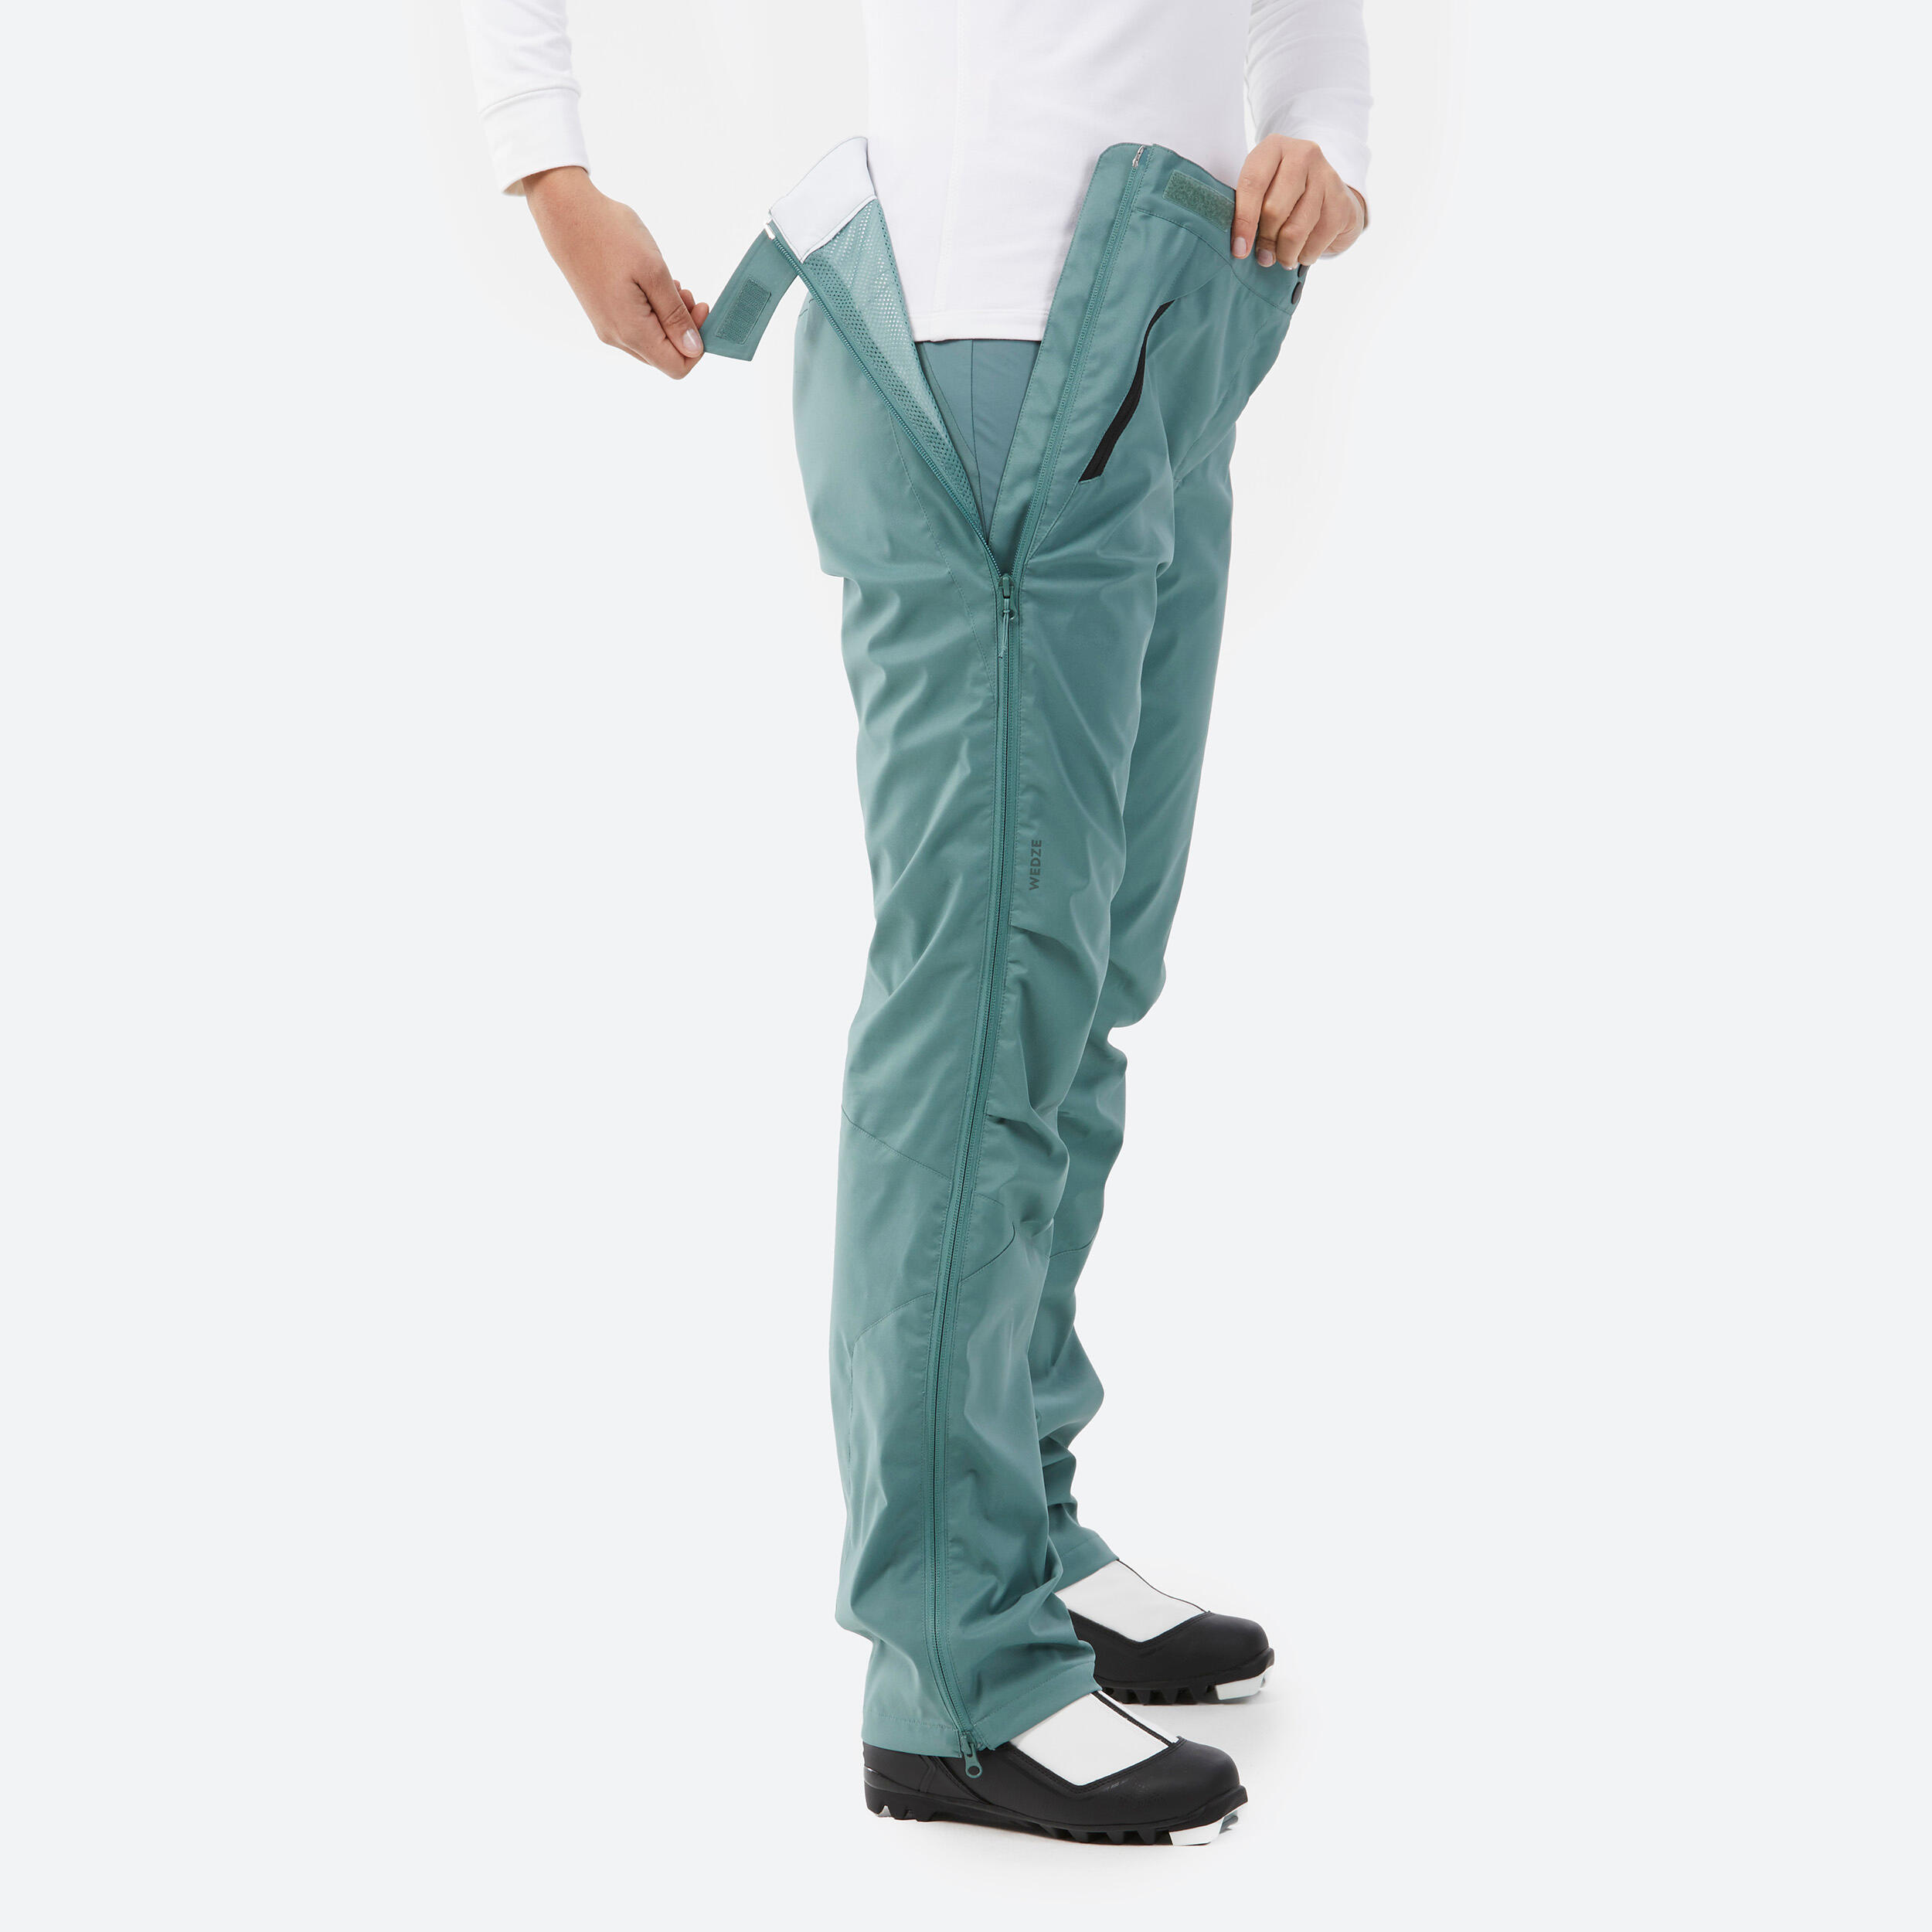 WOMEN'S 150 CROSS-COUNTRY SKI OVER-TROUSERS - GREEN 6/9